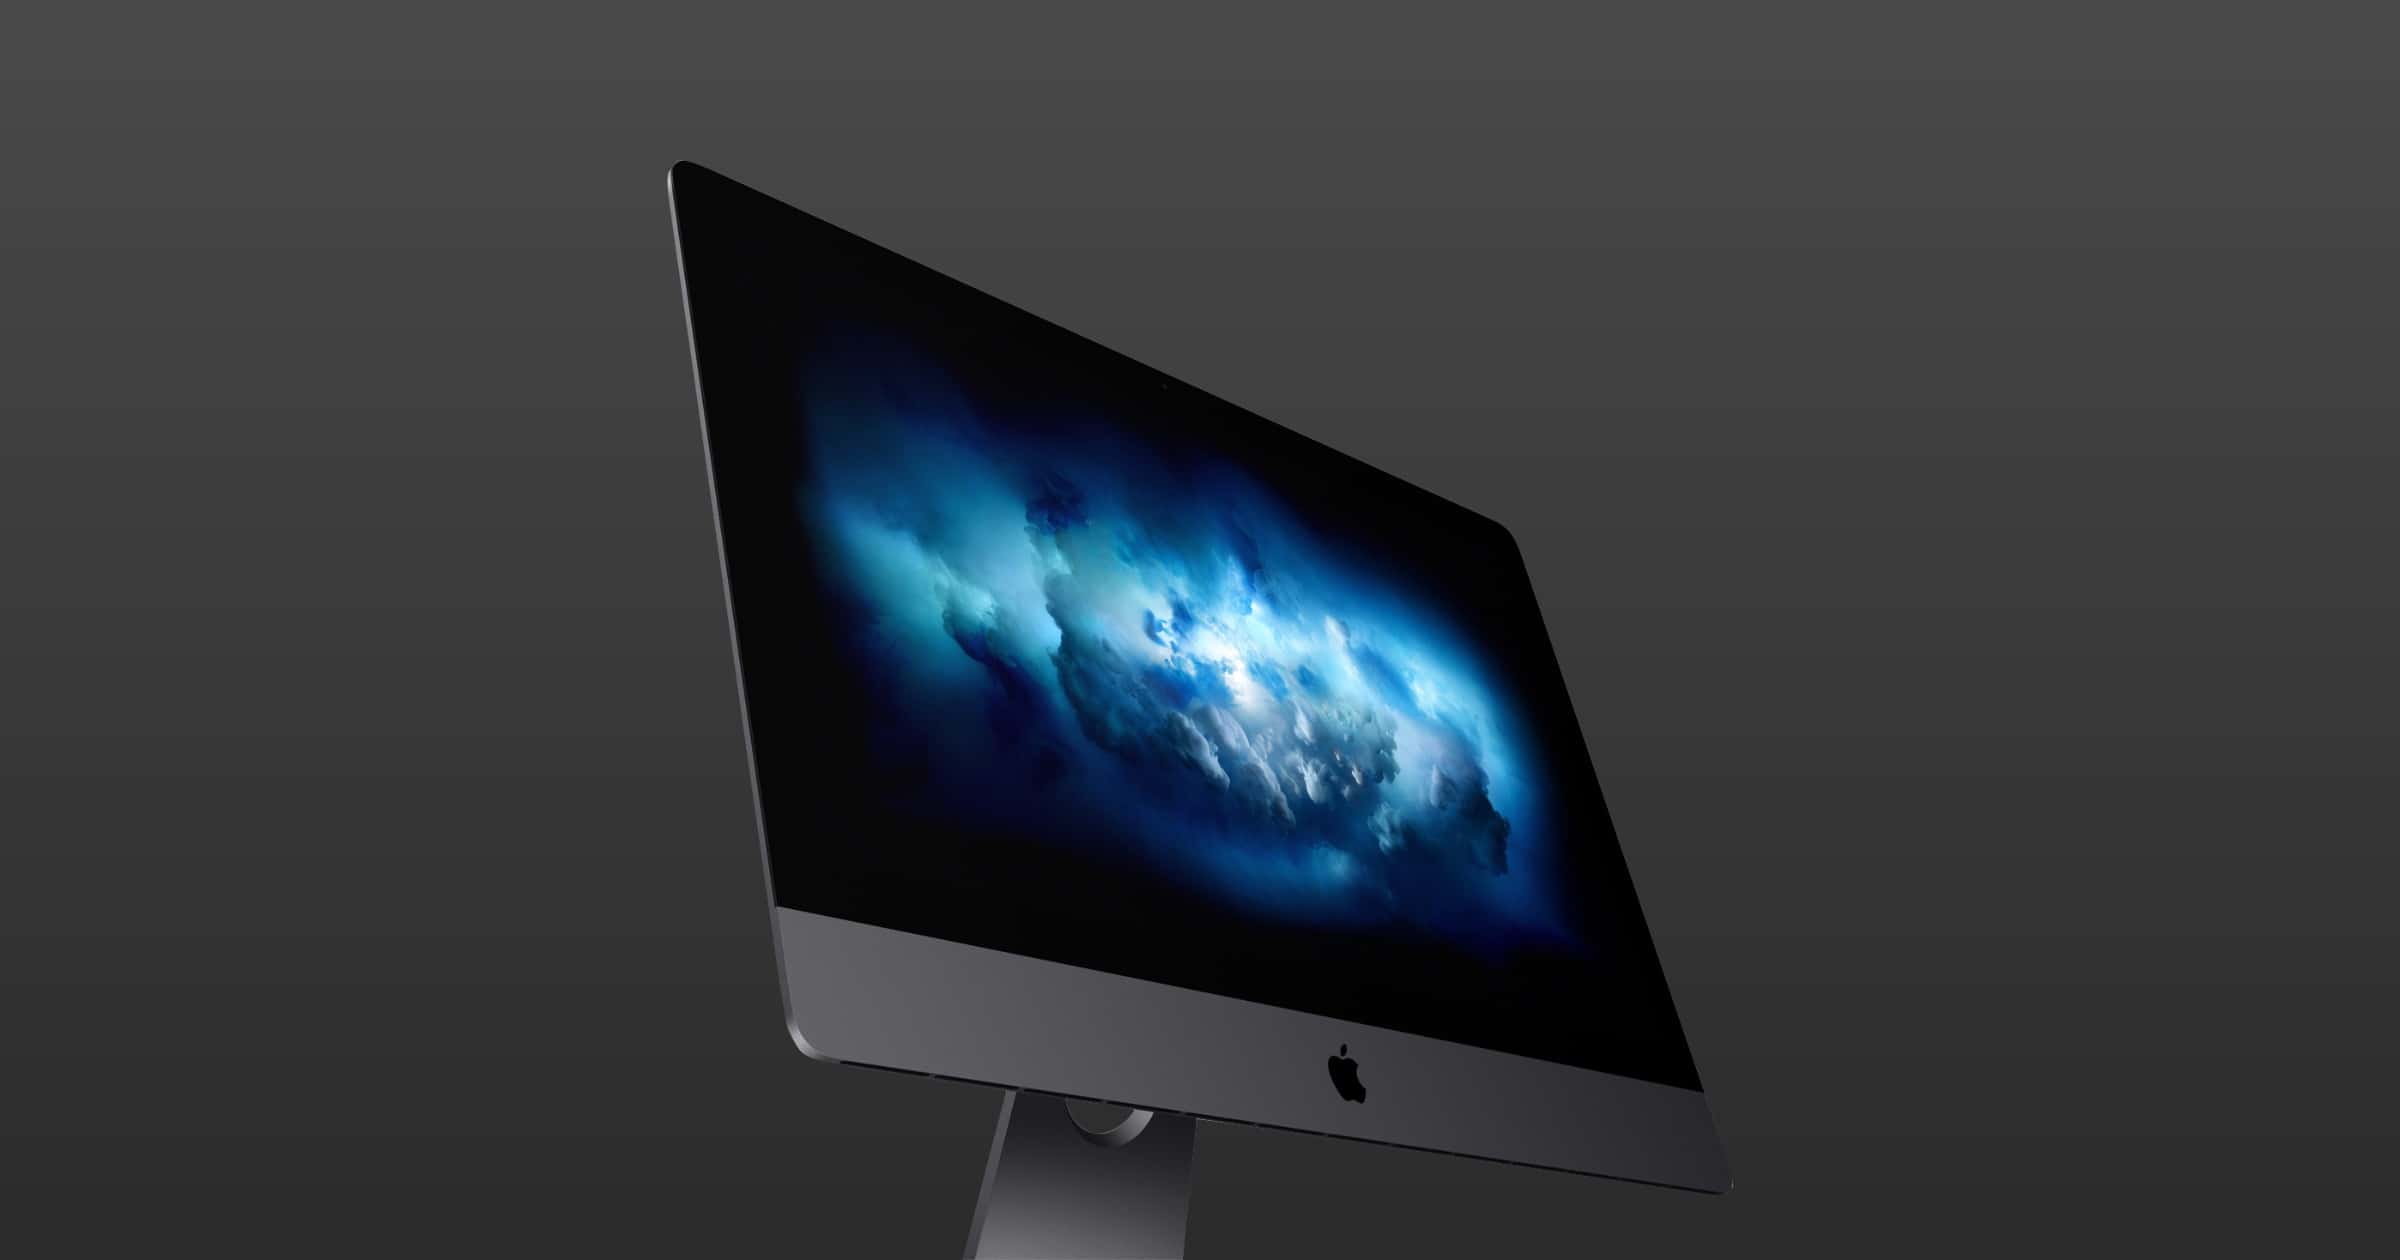 Apple Discontinues iMac Pro, Product Sold While Supplies Last